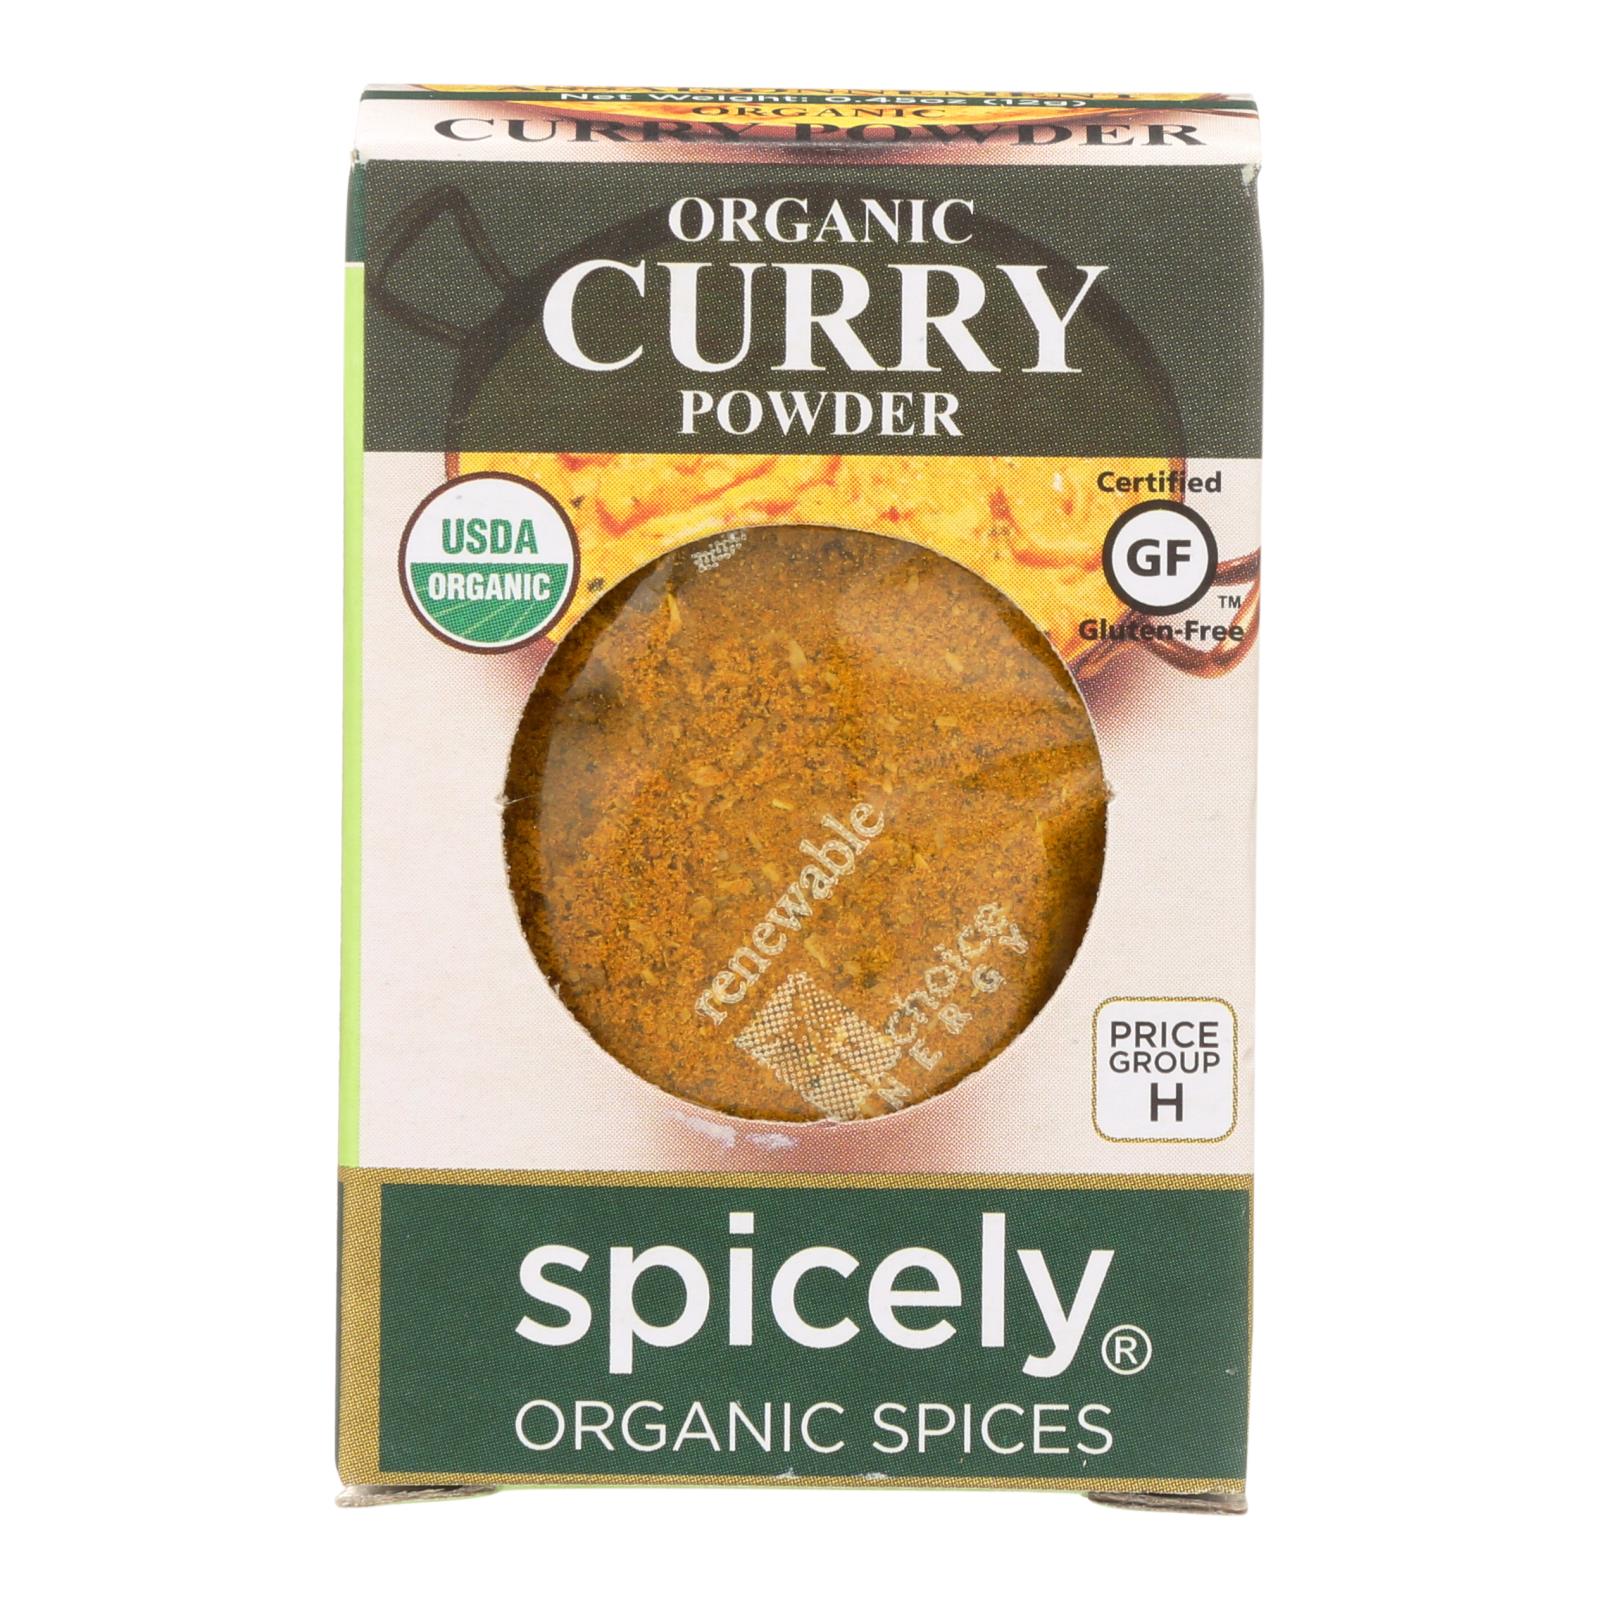 Spicely Organics - Organic Curry Powder - Case Of 6 - 0.45 Oz. - Whole Green Foods